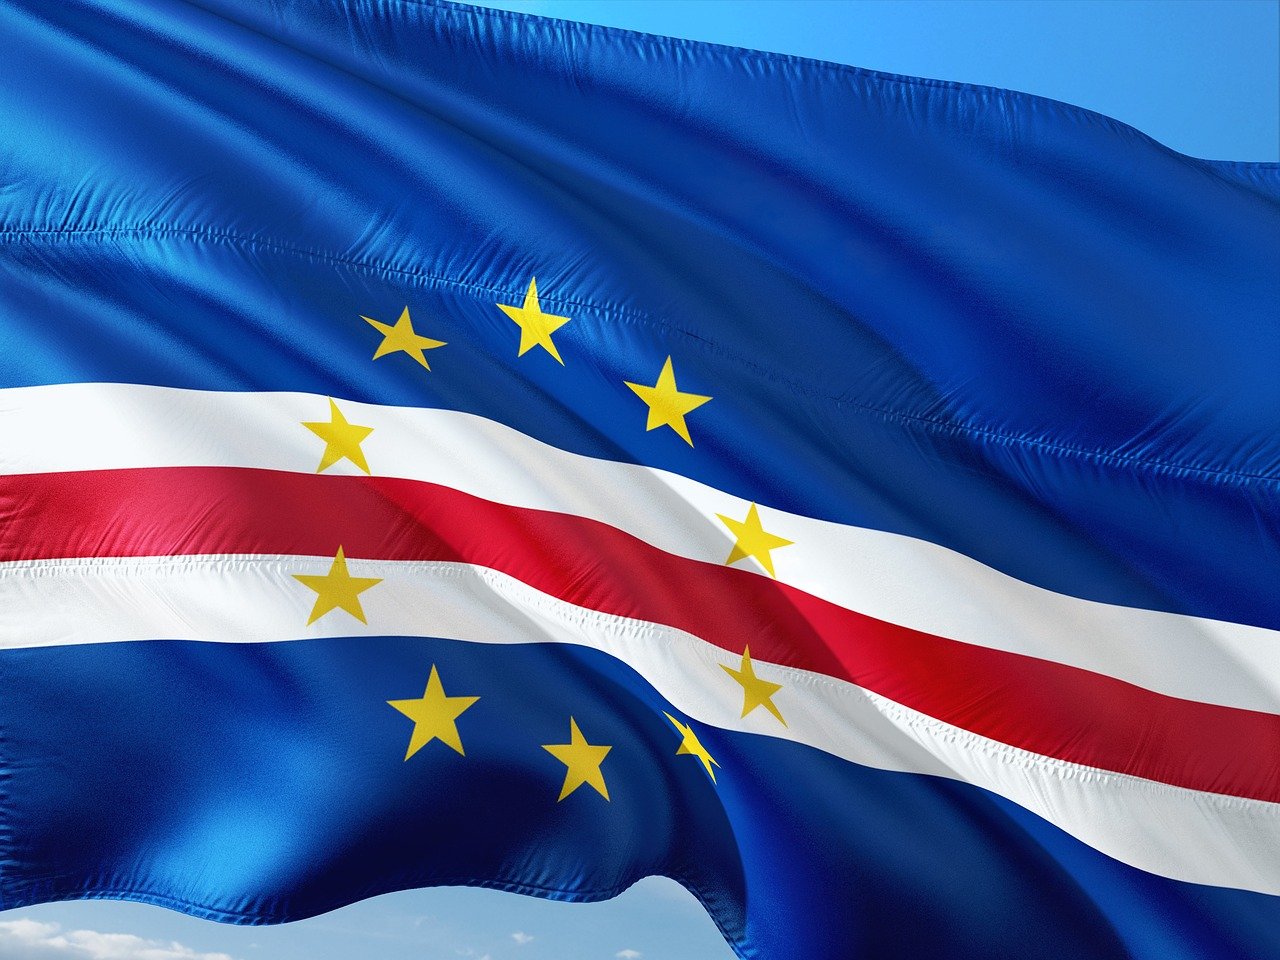 Cabo Verde: Declaration of Intention to Use required for International Trademarks